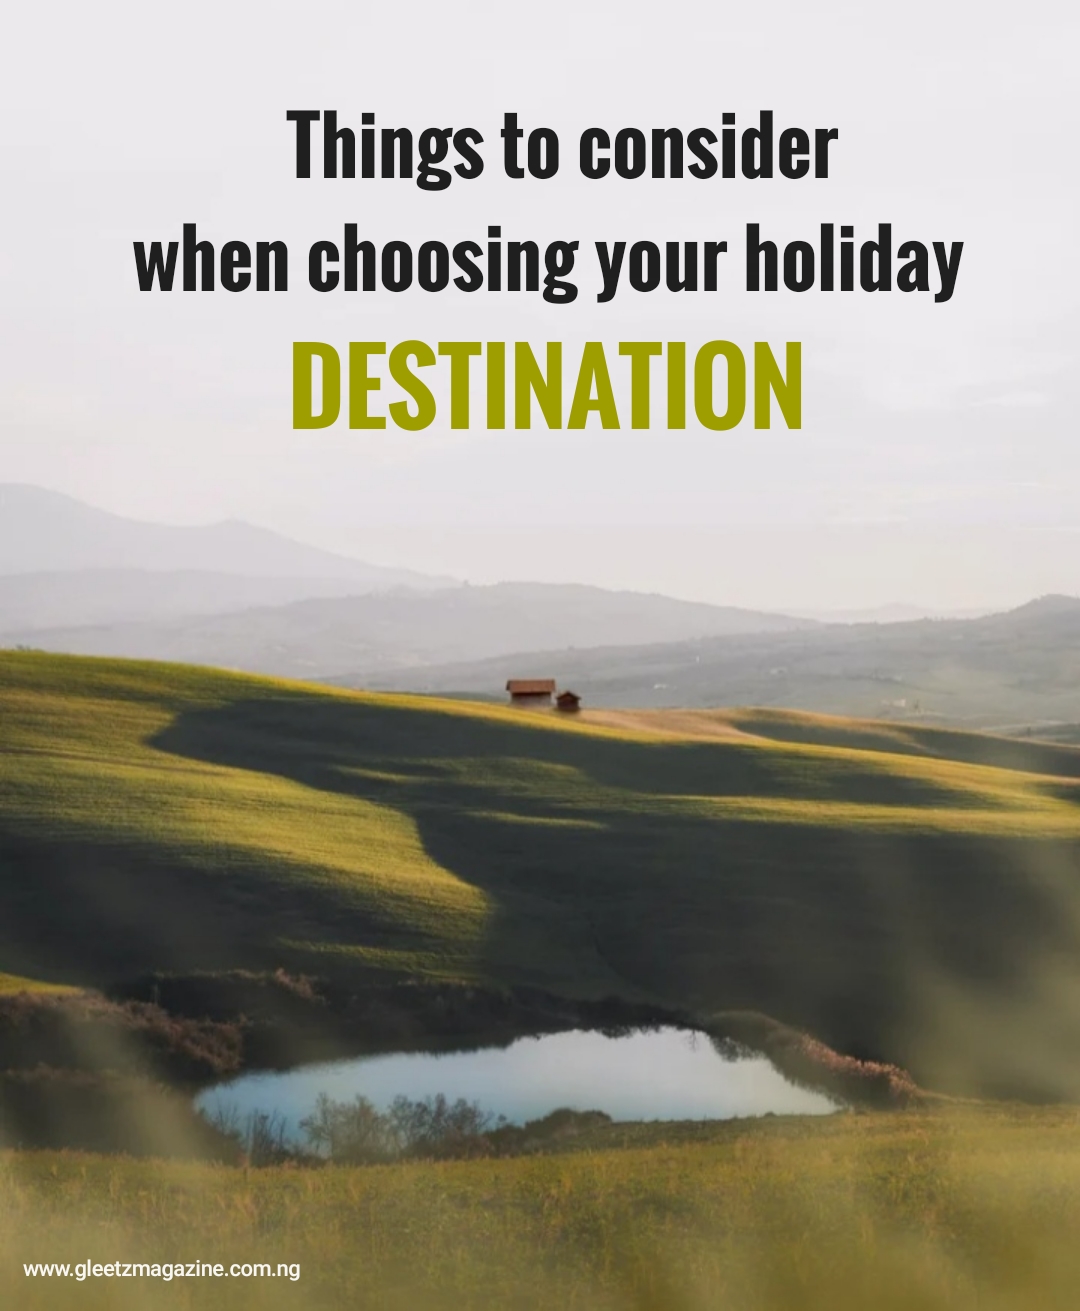 Things to consider when choosing a holiday destination